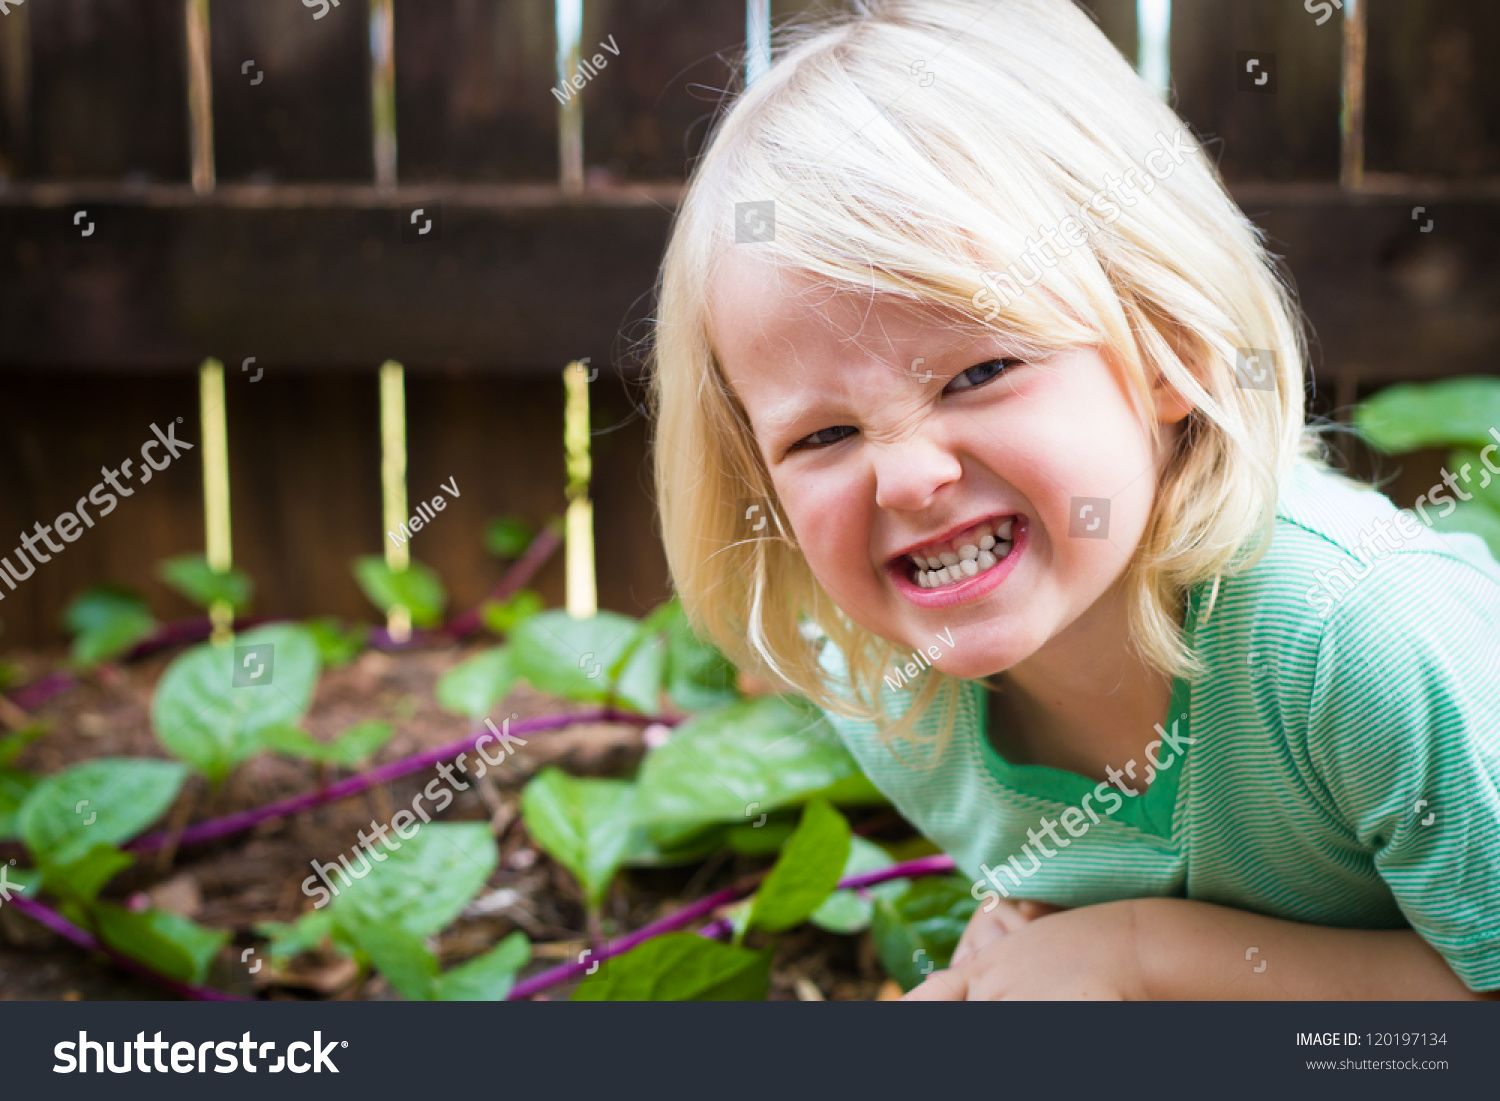 Save to a lightbox - stock-photo-angry-child-outdoors-in-the-garden-pulling-a-mean-face-120197134